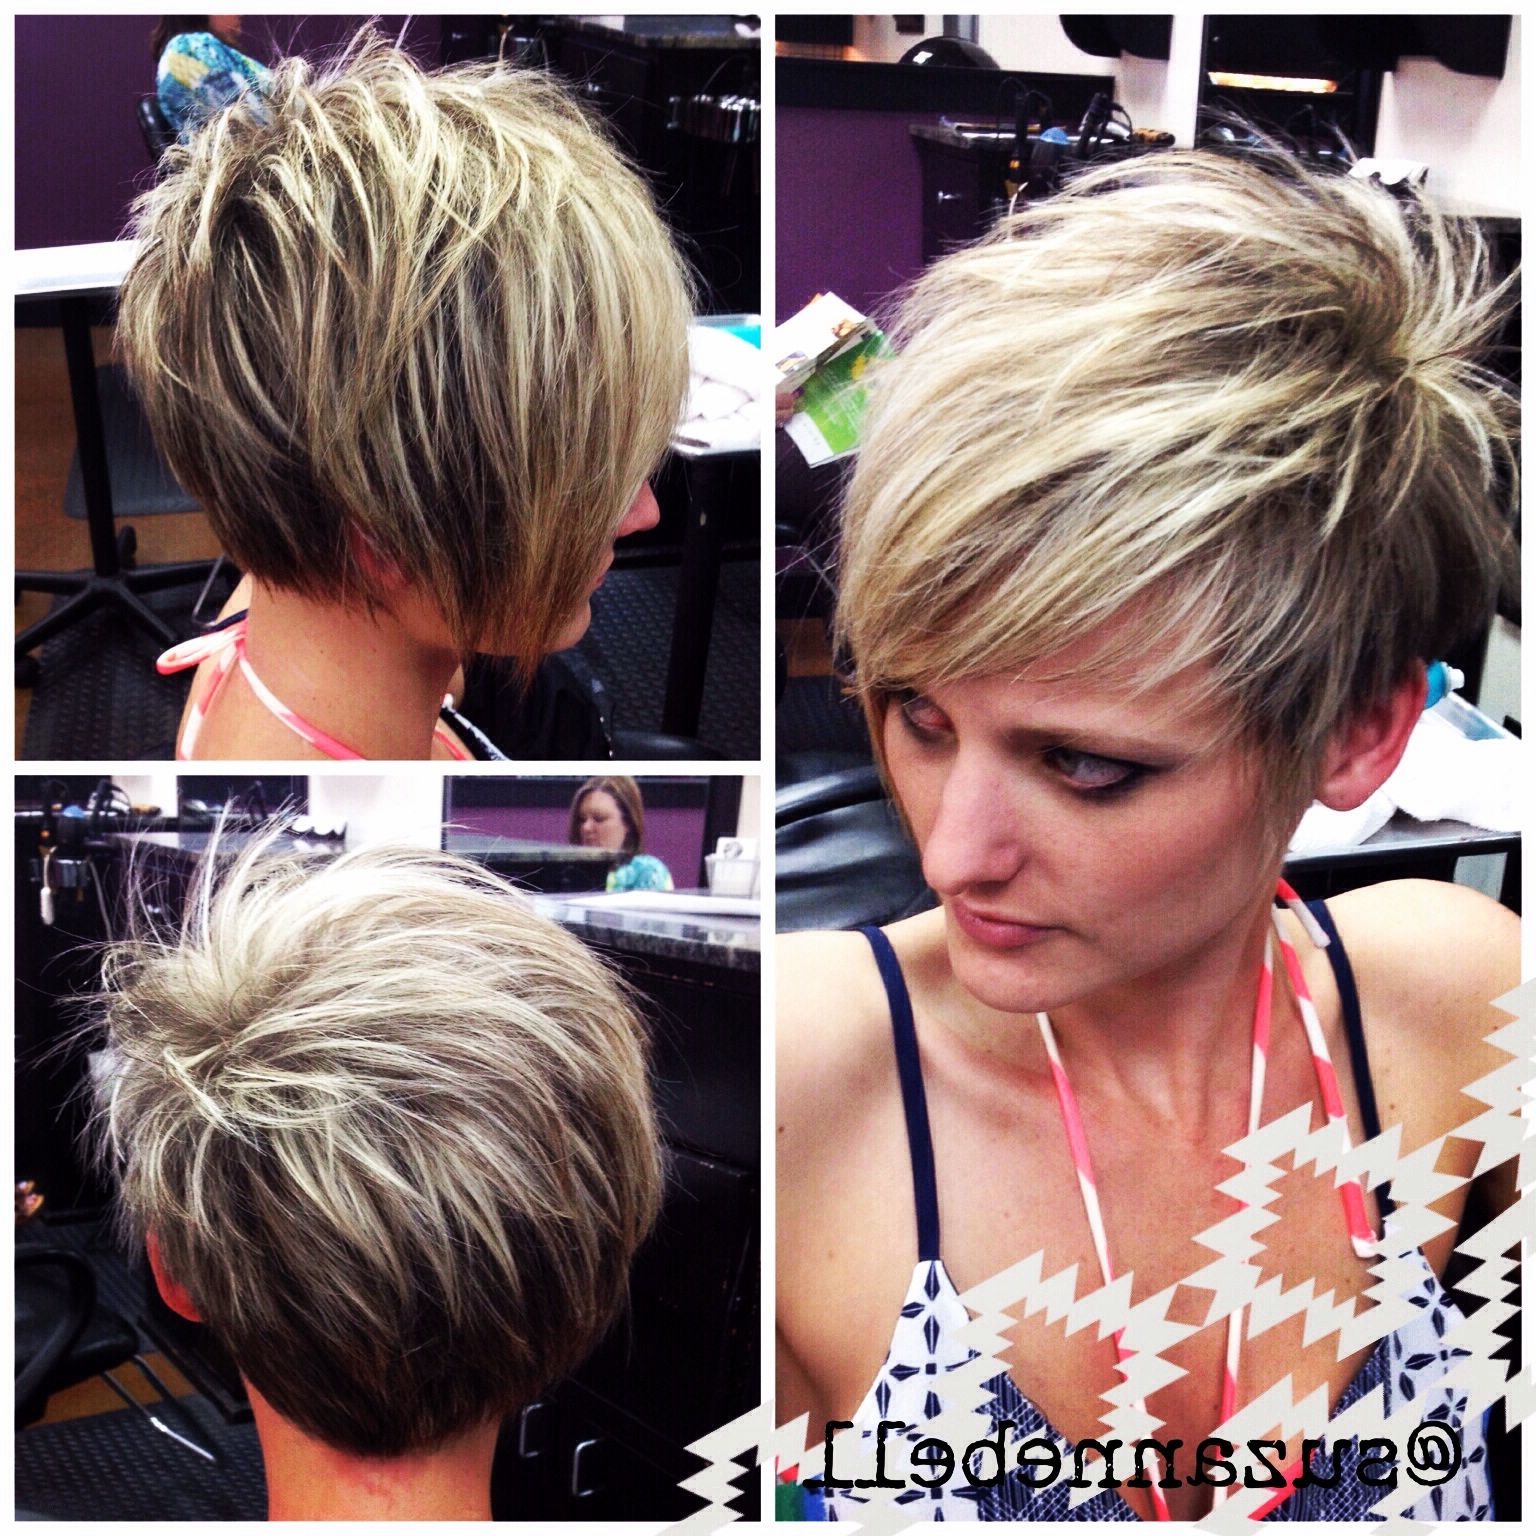 Asymmetrical Pixie | Hair Inspiration | Pinterest | Asymmetrical In Best And Newest Short Pixie Hairstyles From The Back (View 7 of 15)